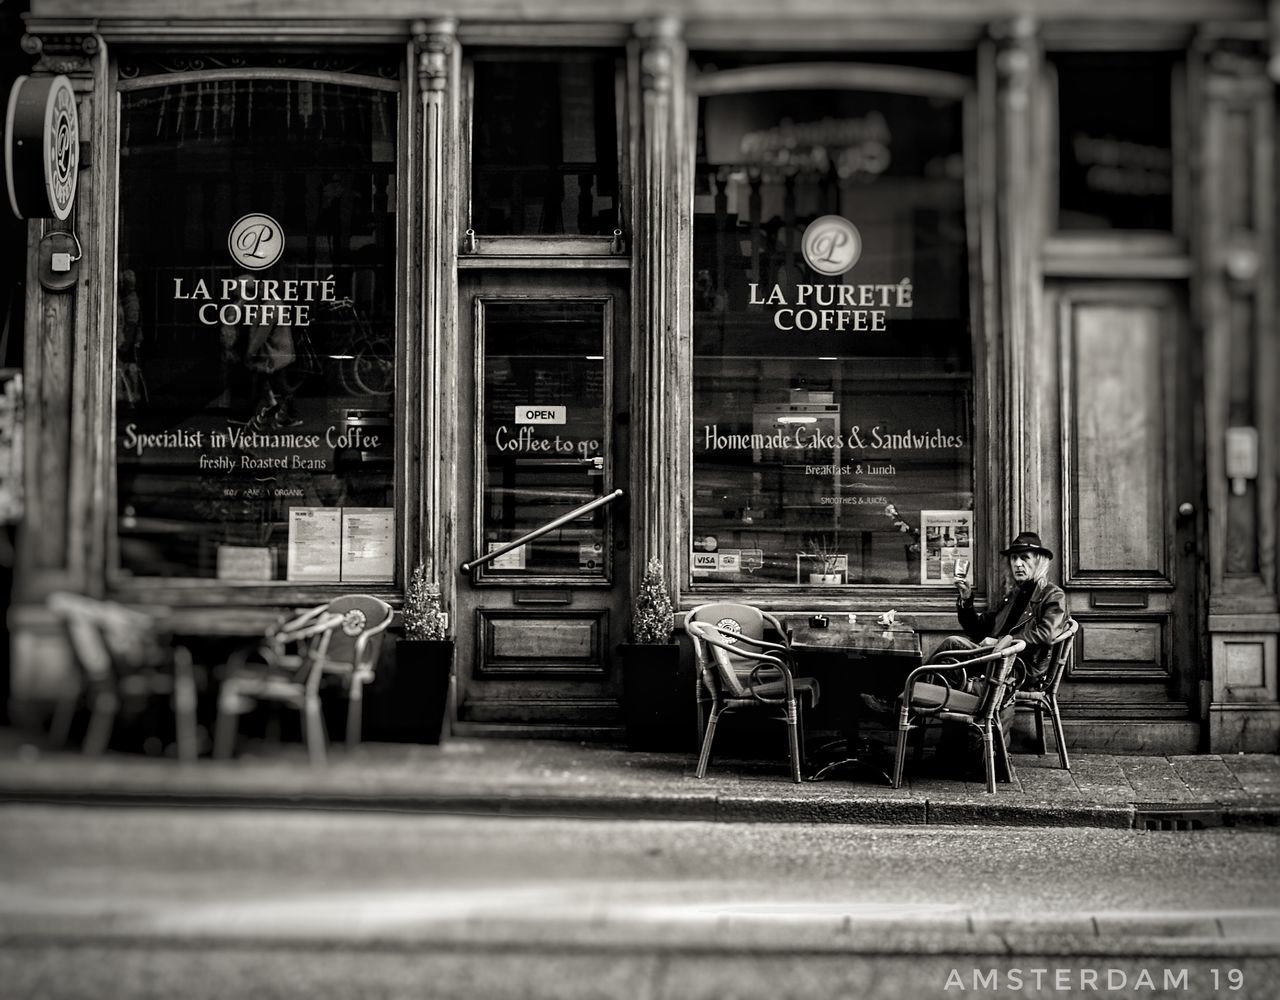 architecture, seat, text, communication, chair, cafe, no people, sign, building exterior, built structure, outdoors, day, business, table, information, empty, restaurant, western script, script, window